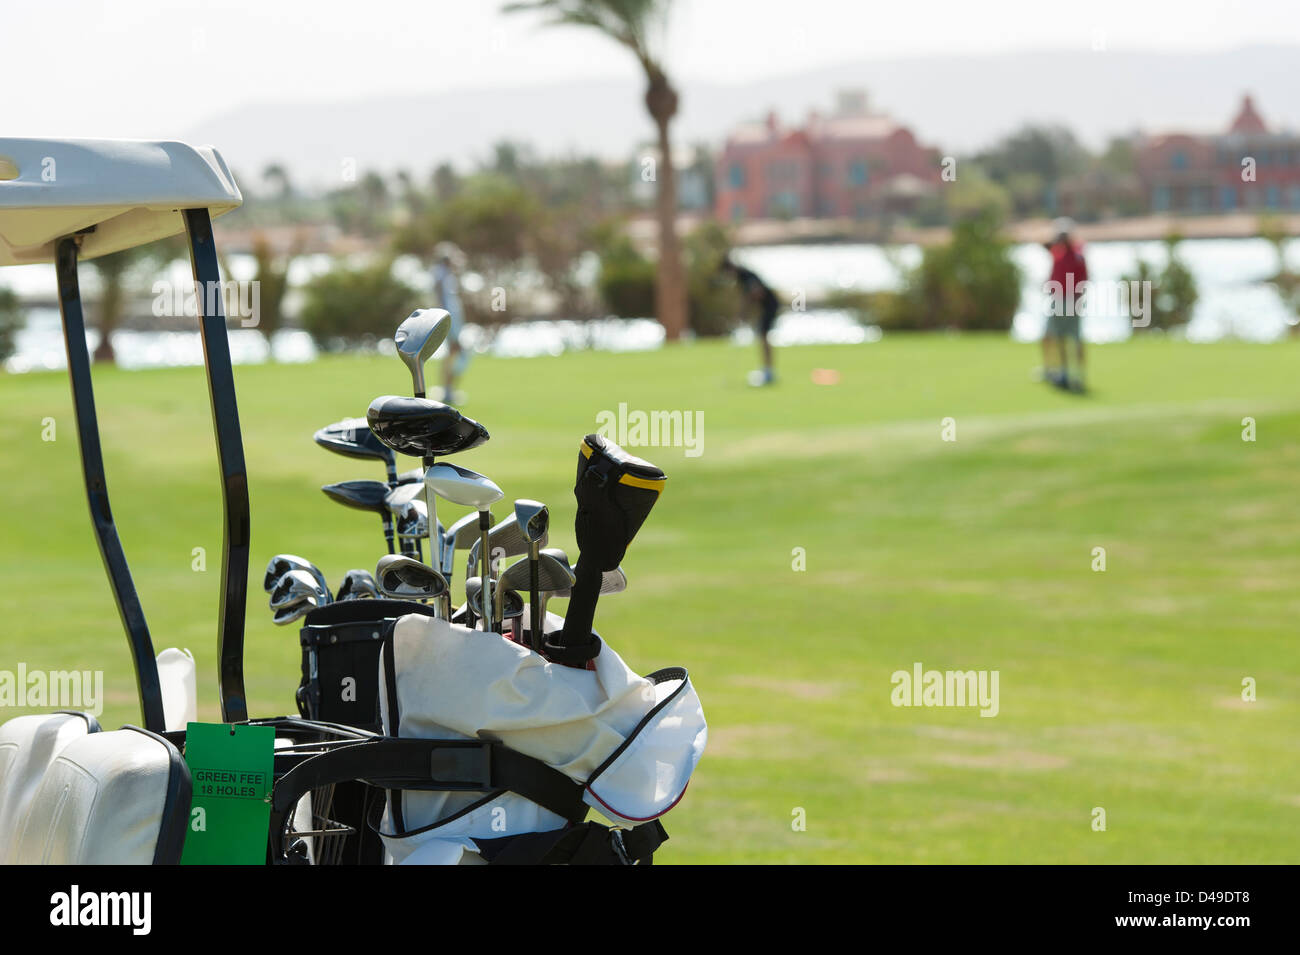 Closeup detail of golf clubs in a bag with golfers on the green in background Stock Photo